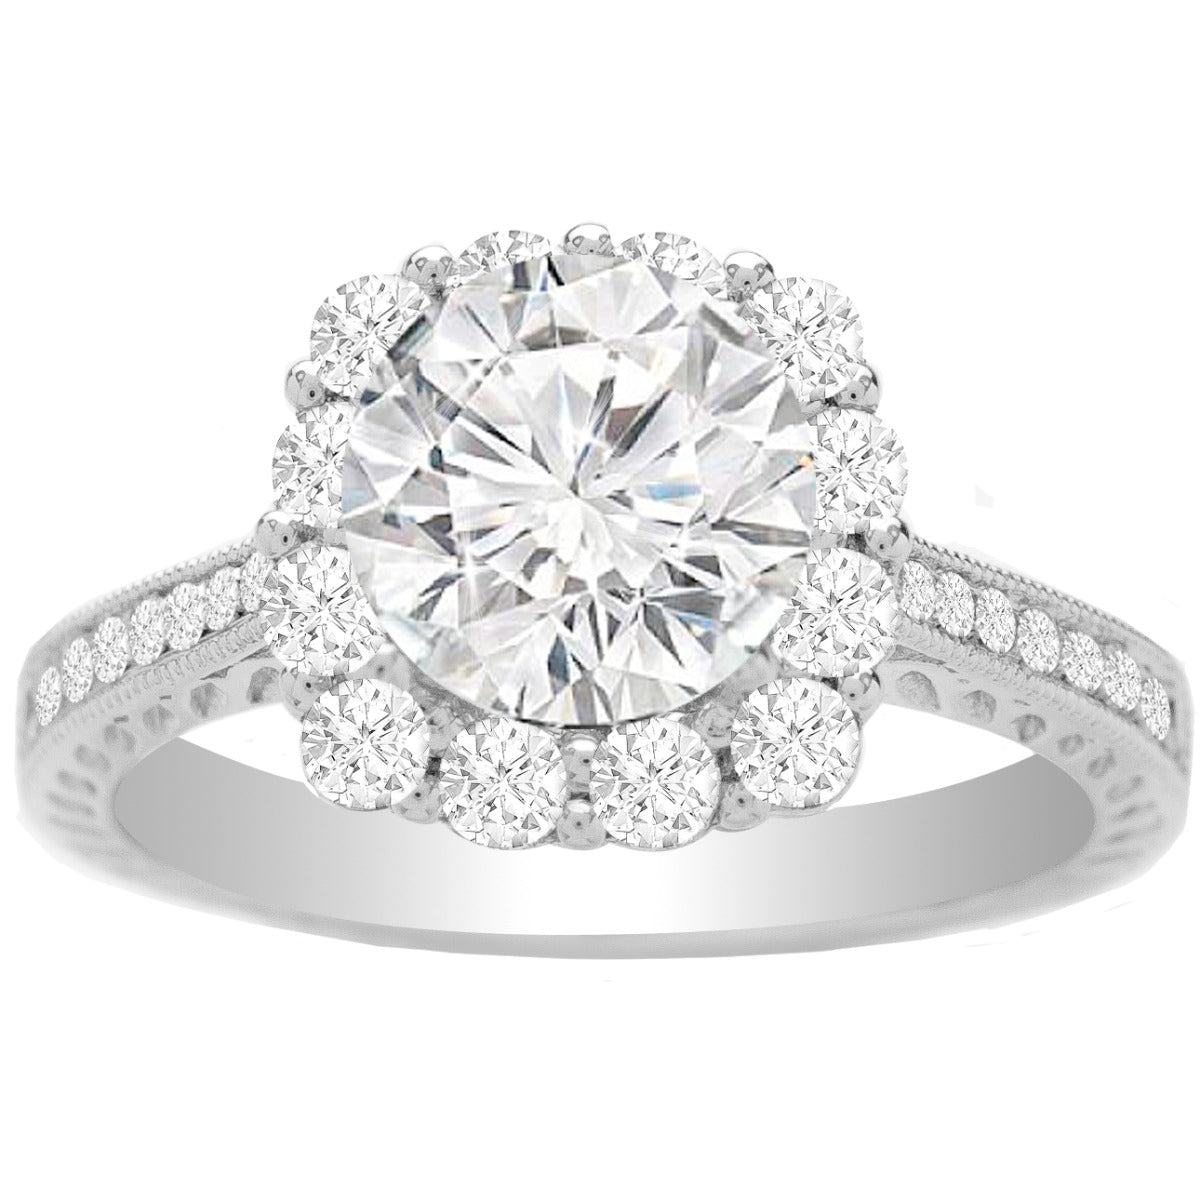 Shayla Engagement Ring Setting in 14K White Gold; 0.68 ctw